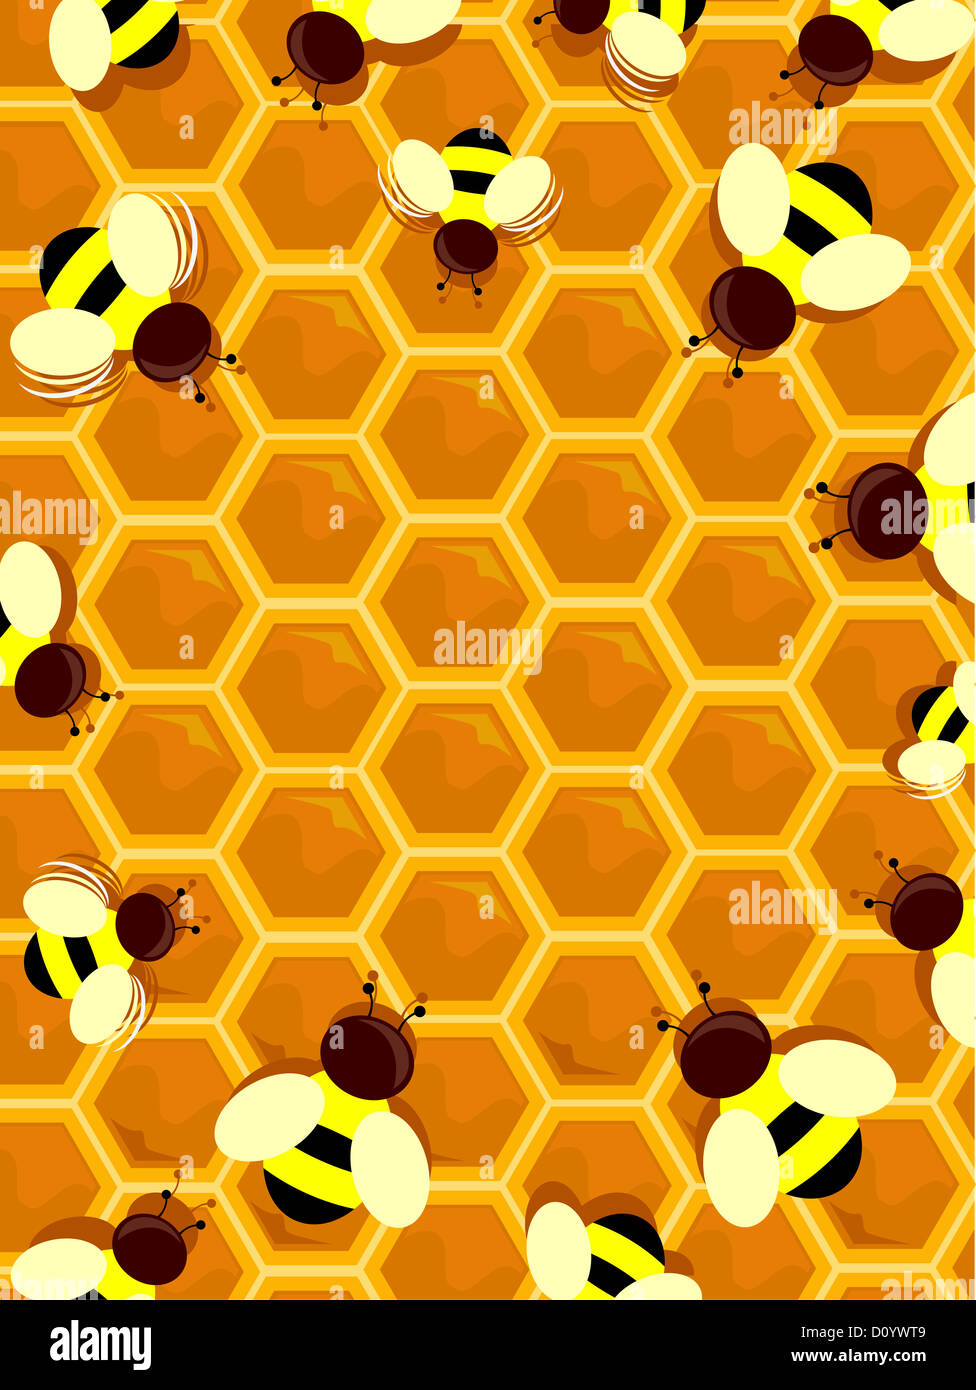 Illustration of a Beehive Frame with Honey Bees Stock Photo